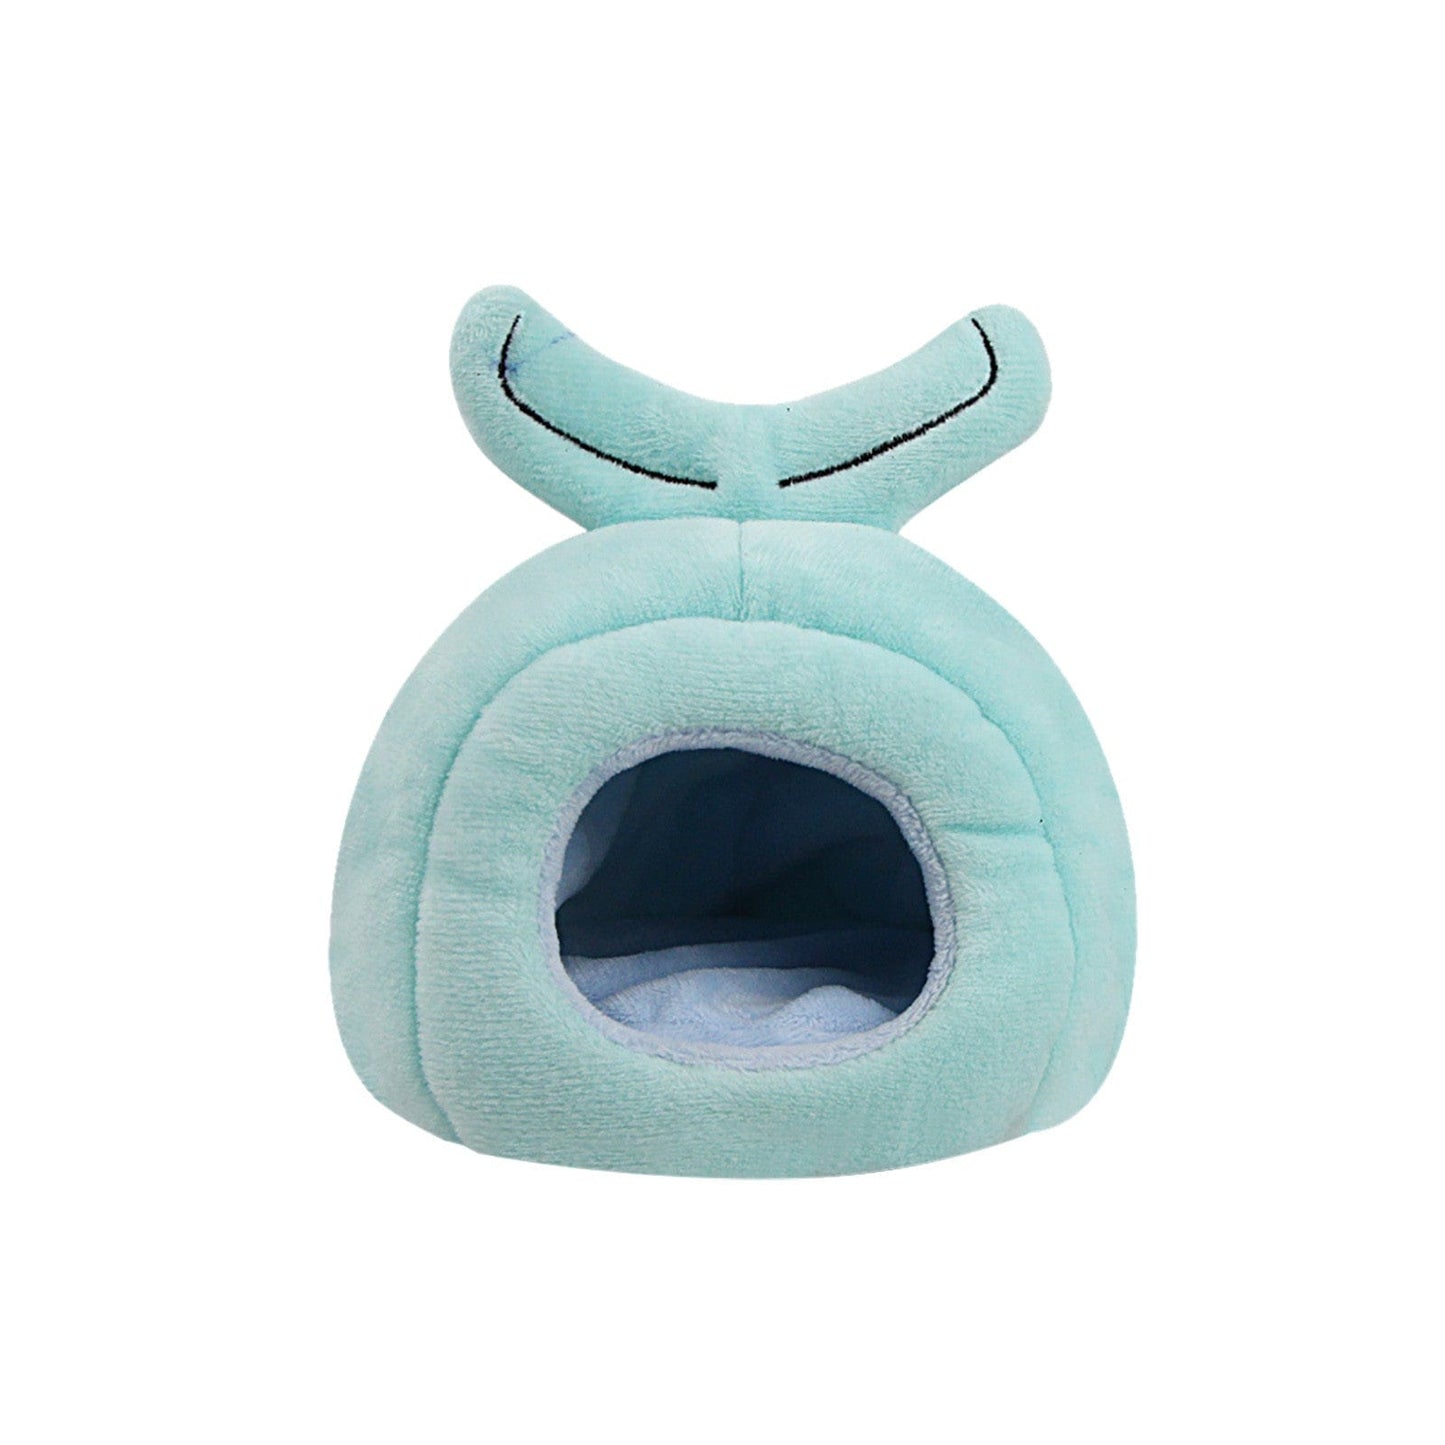 Womail Outdoor Indoor Cat Dog House Cute, Soft and Comfortable Pet Room in the Shape of a Fish Tail